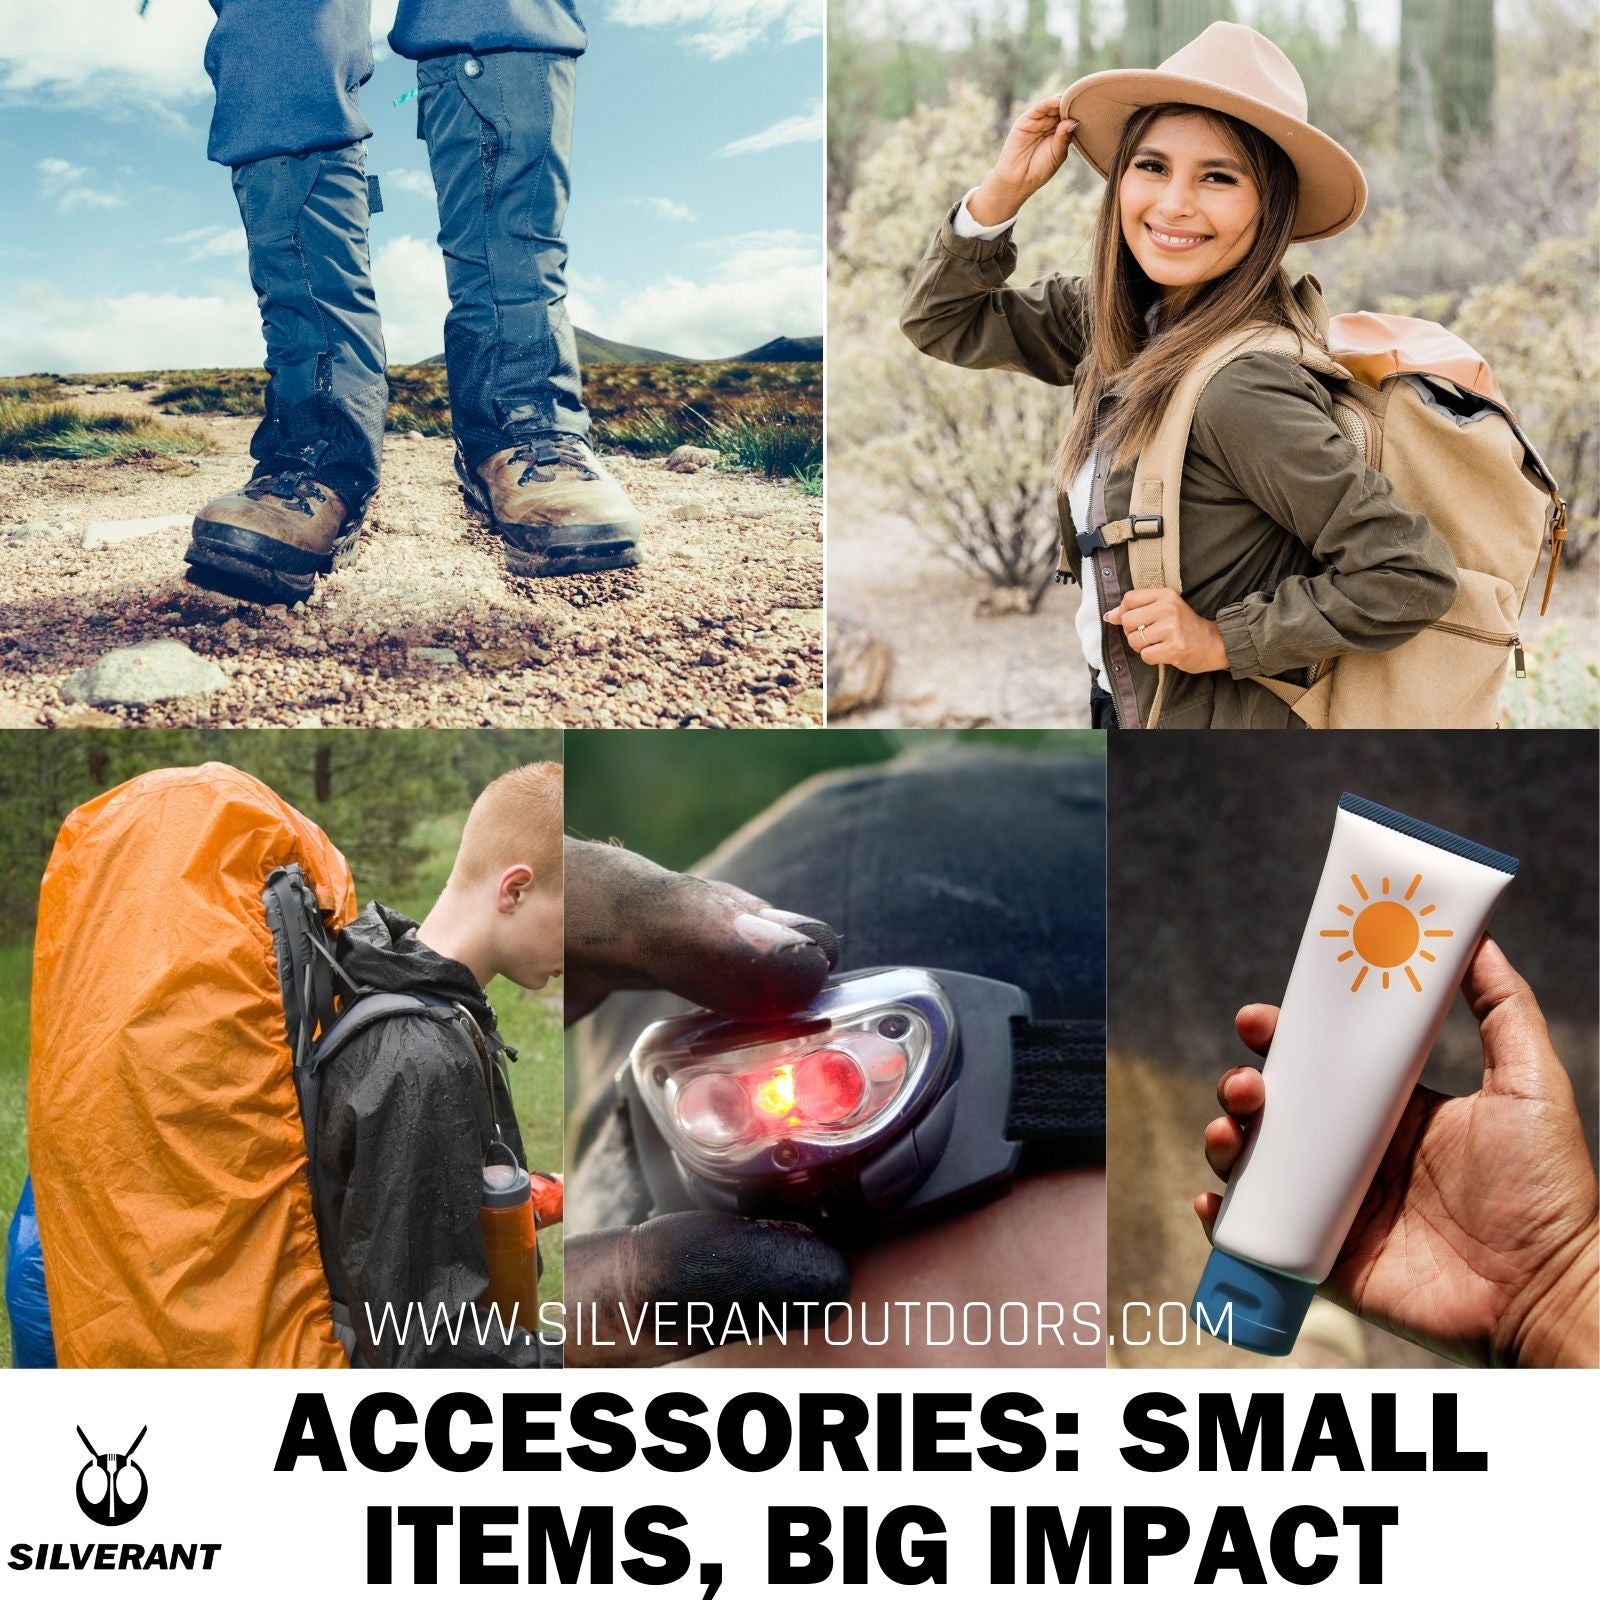 Accessories: Small Items, Big Impact